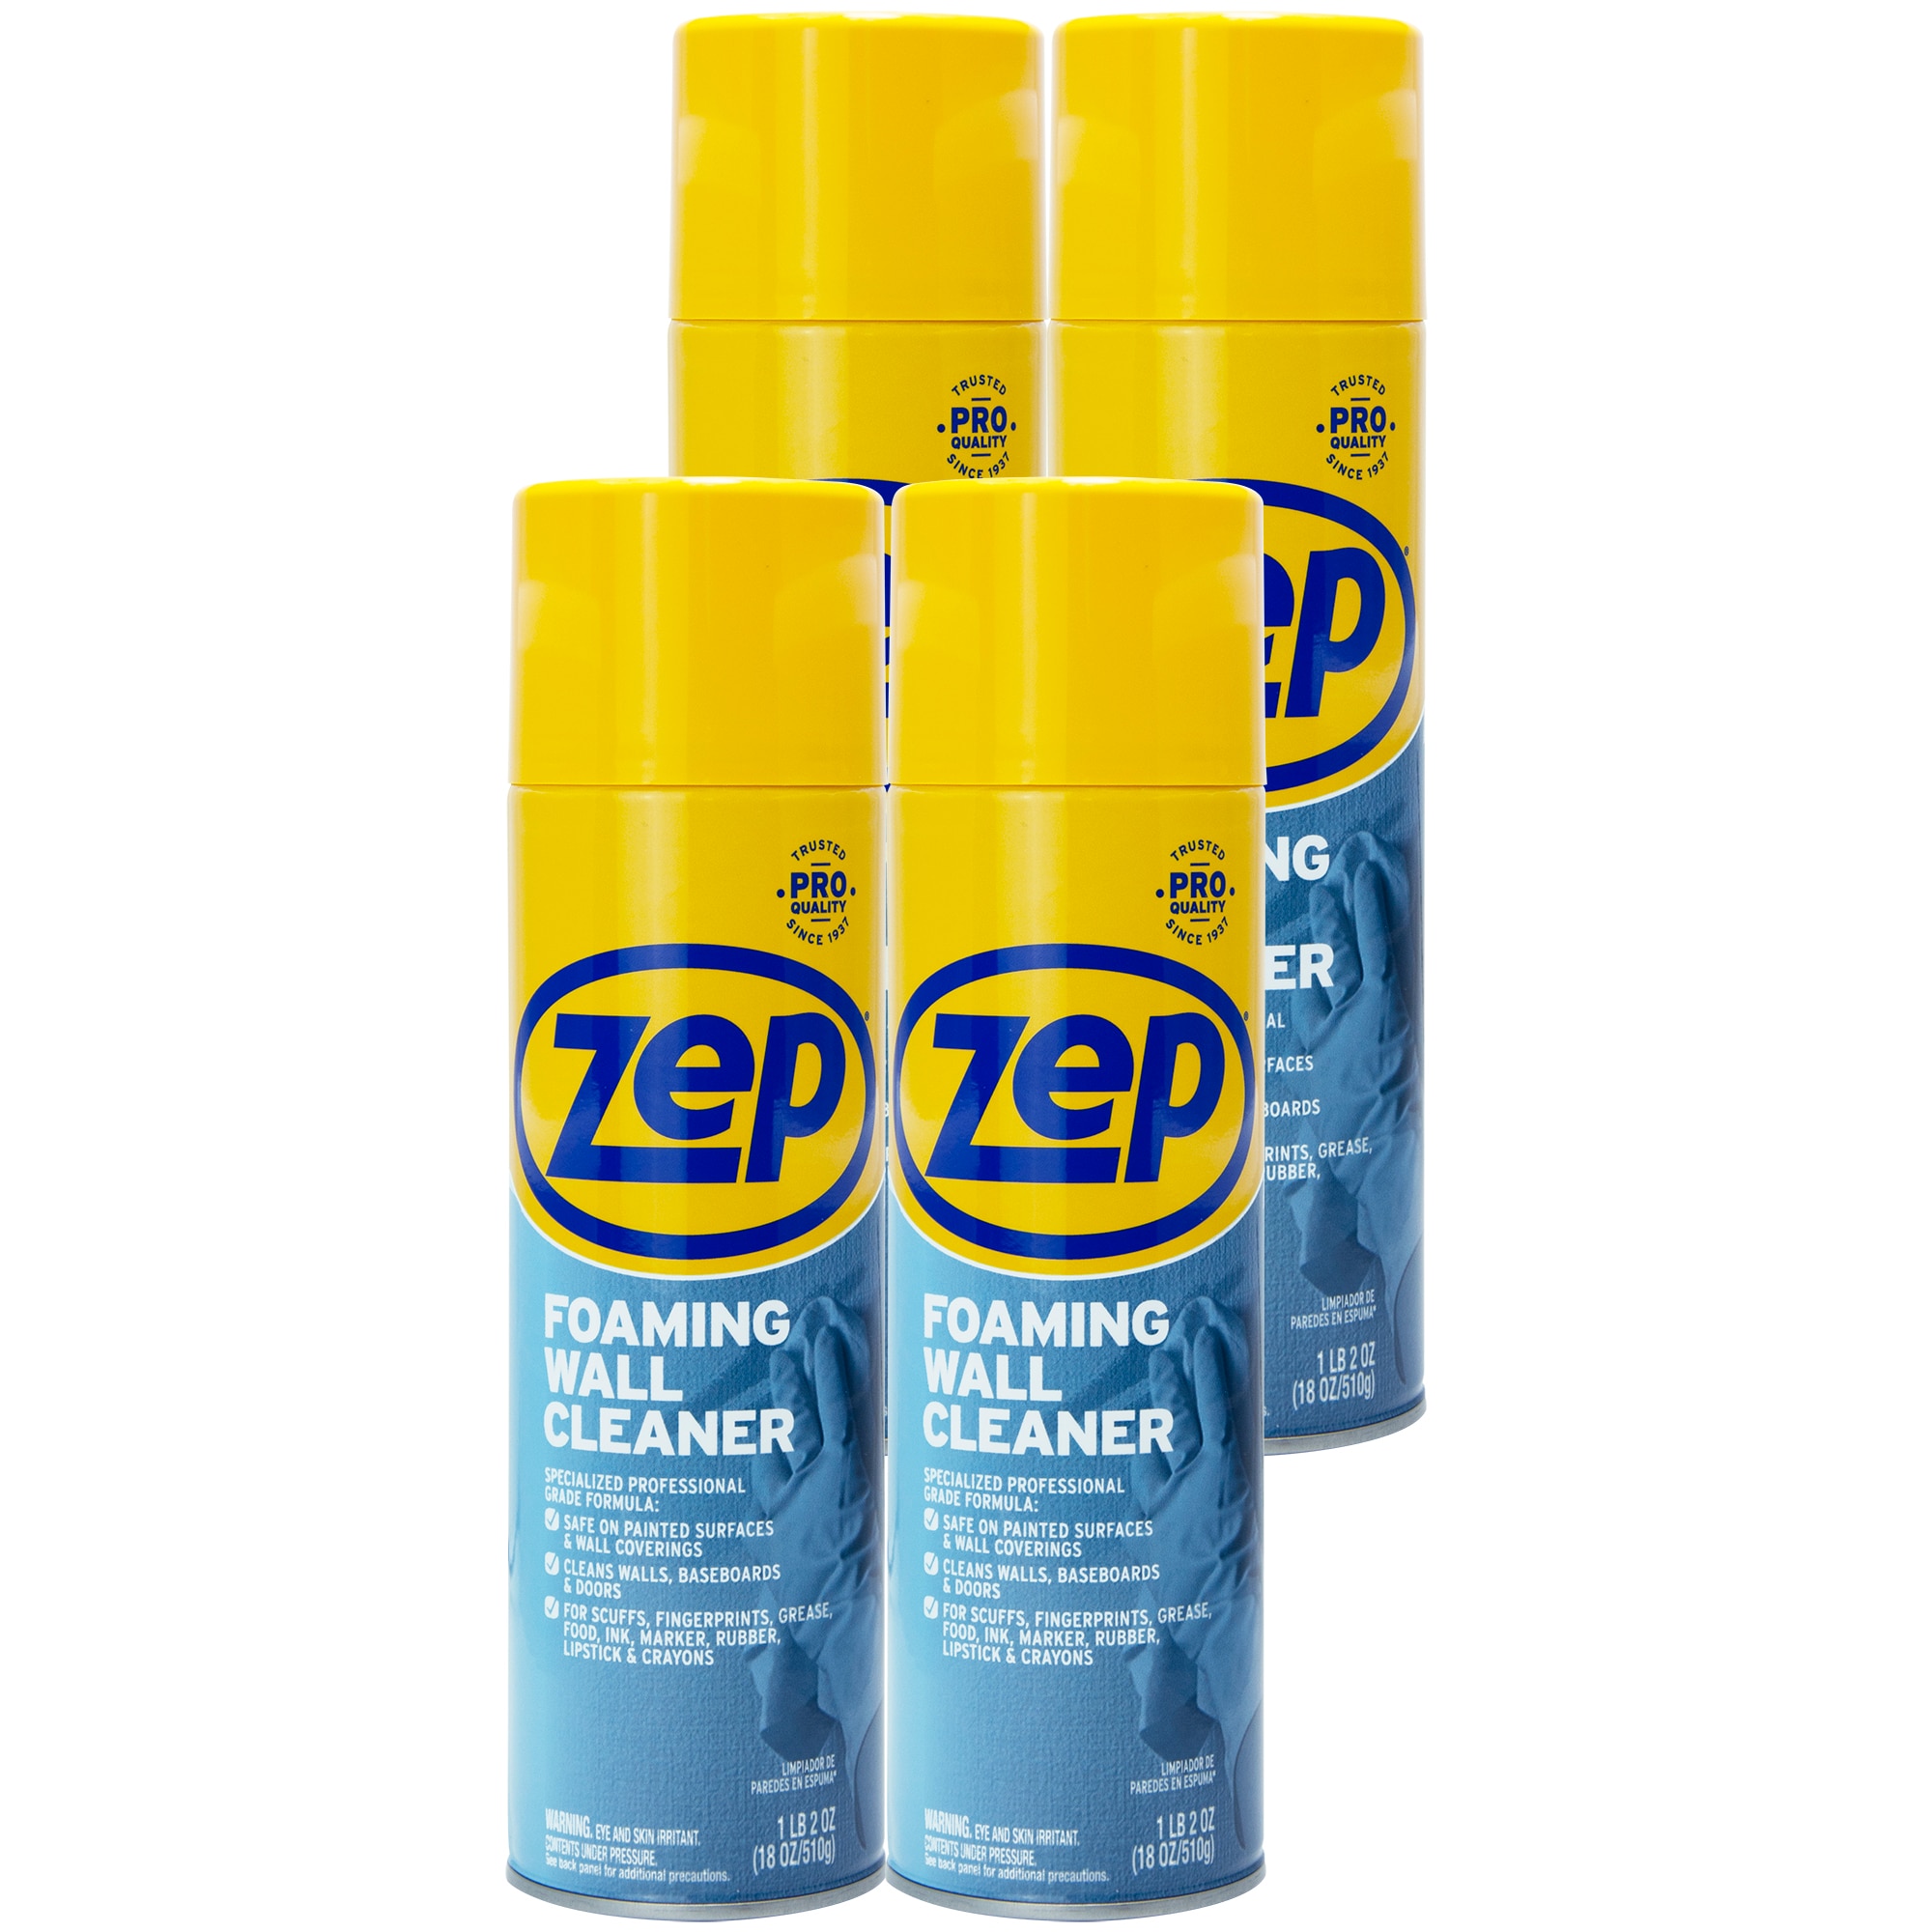 Replying to @chroniclesofnadia1 yea Zep wall cleaner works on Mayte pa, zep wall cleaner